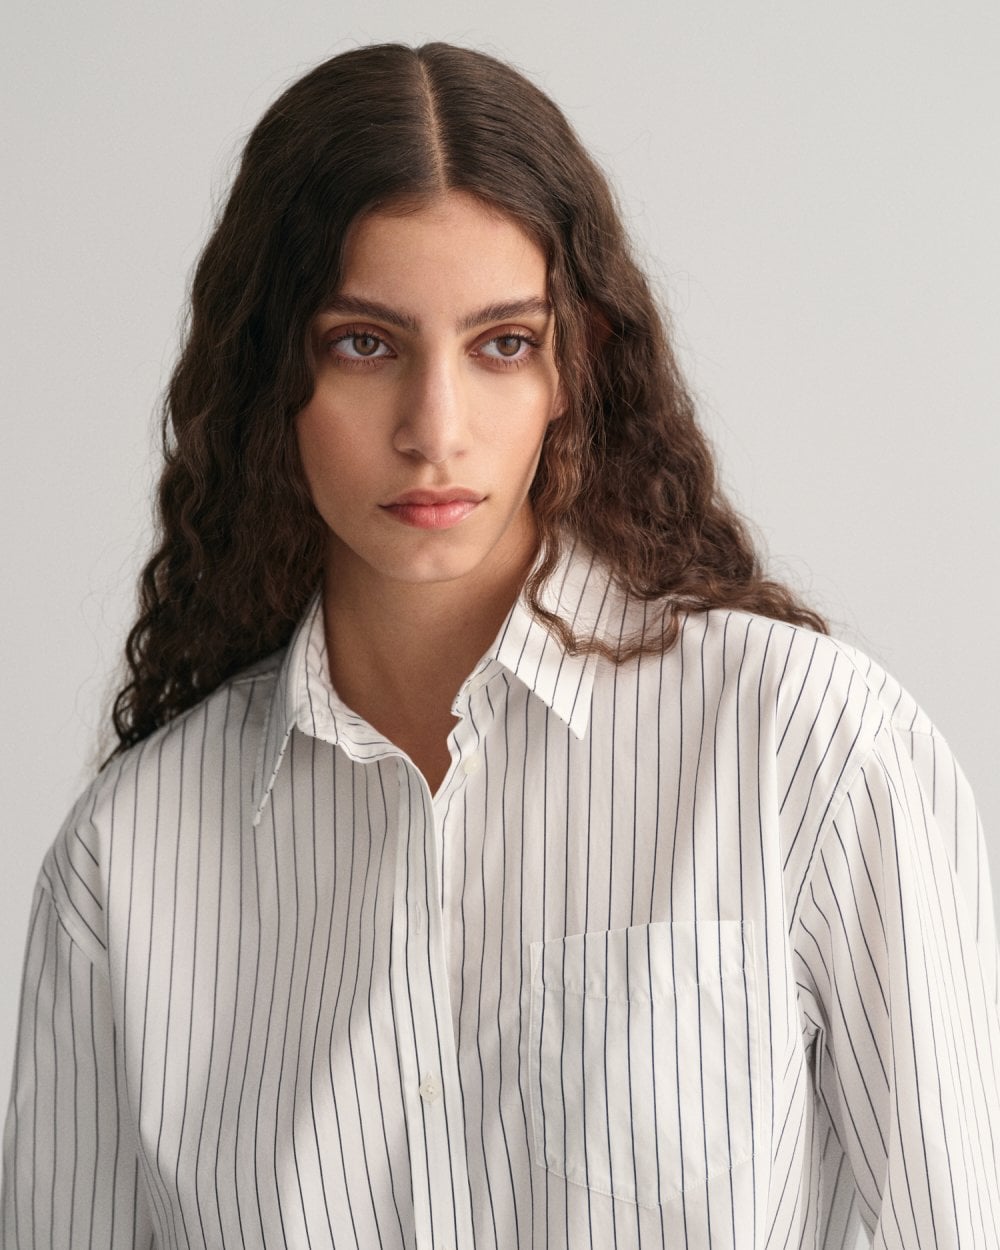 Relaxed Fit Striped Poplin Shirt